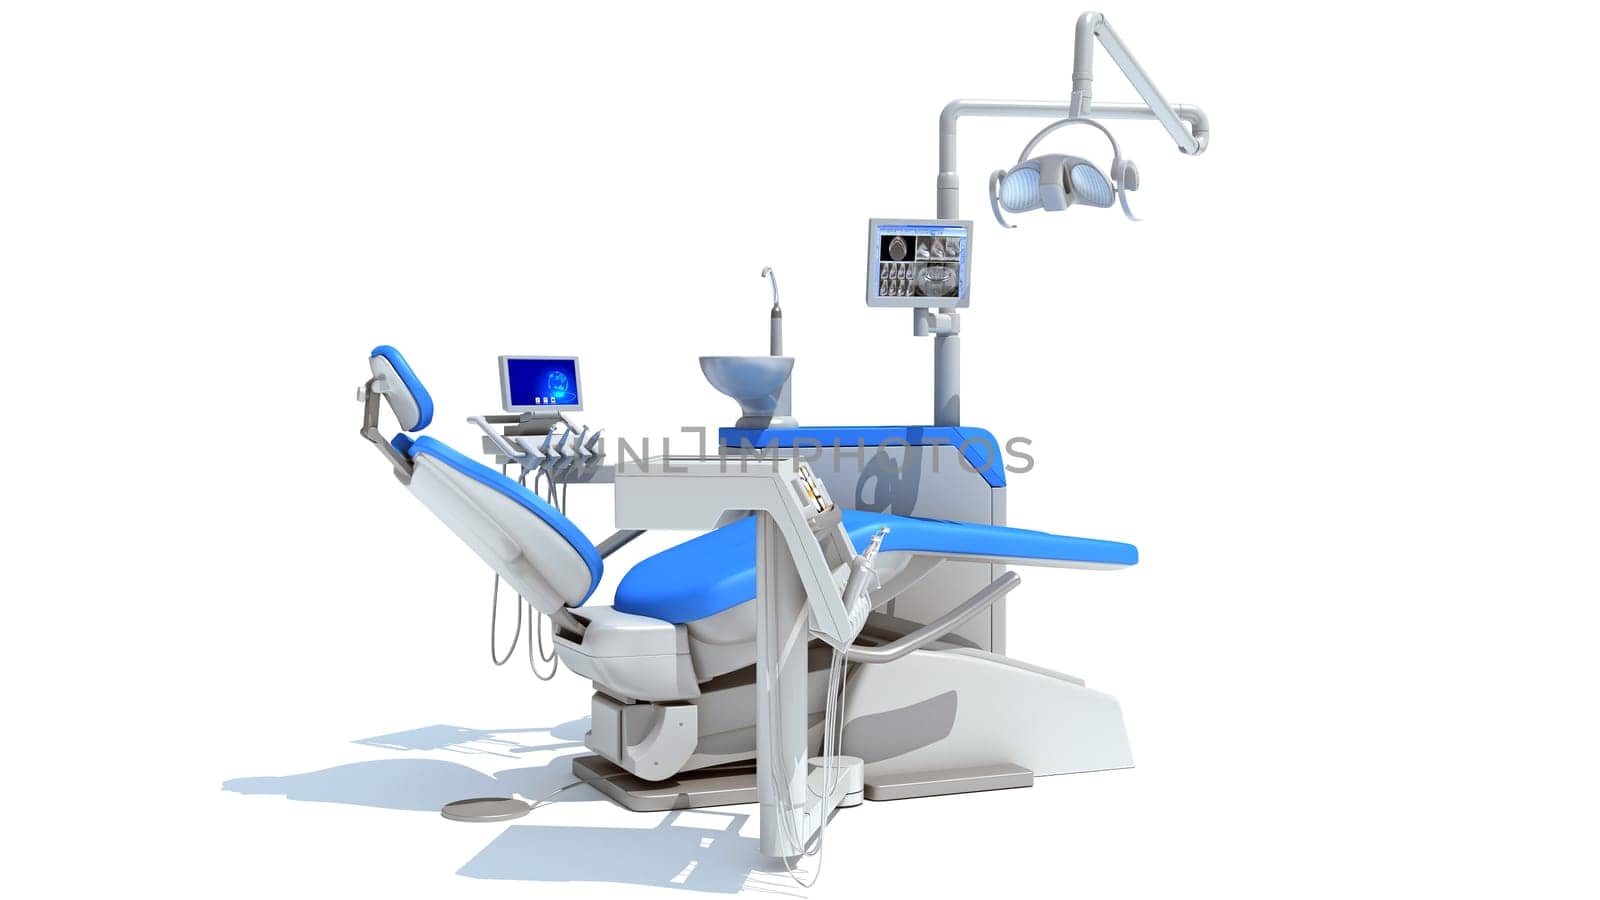 Dental treatment station unit 3D rendering on white background by 3DHorse